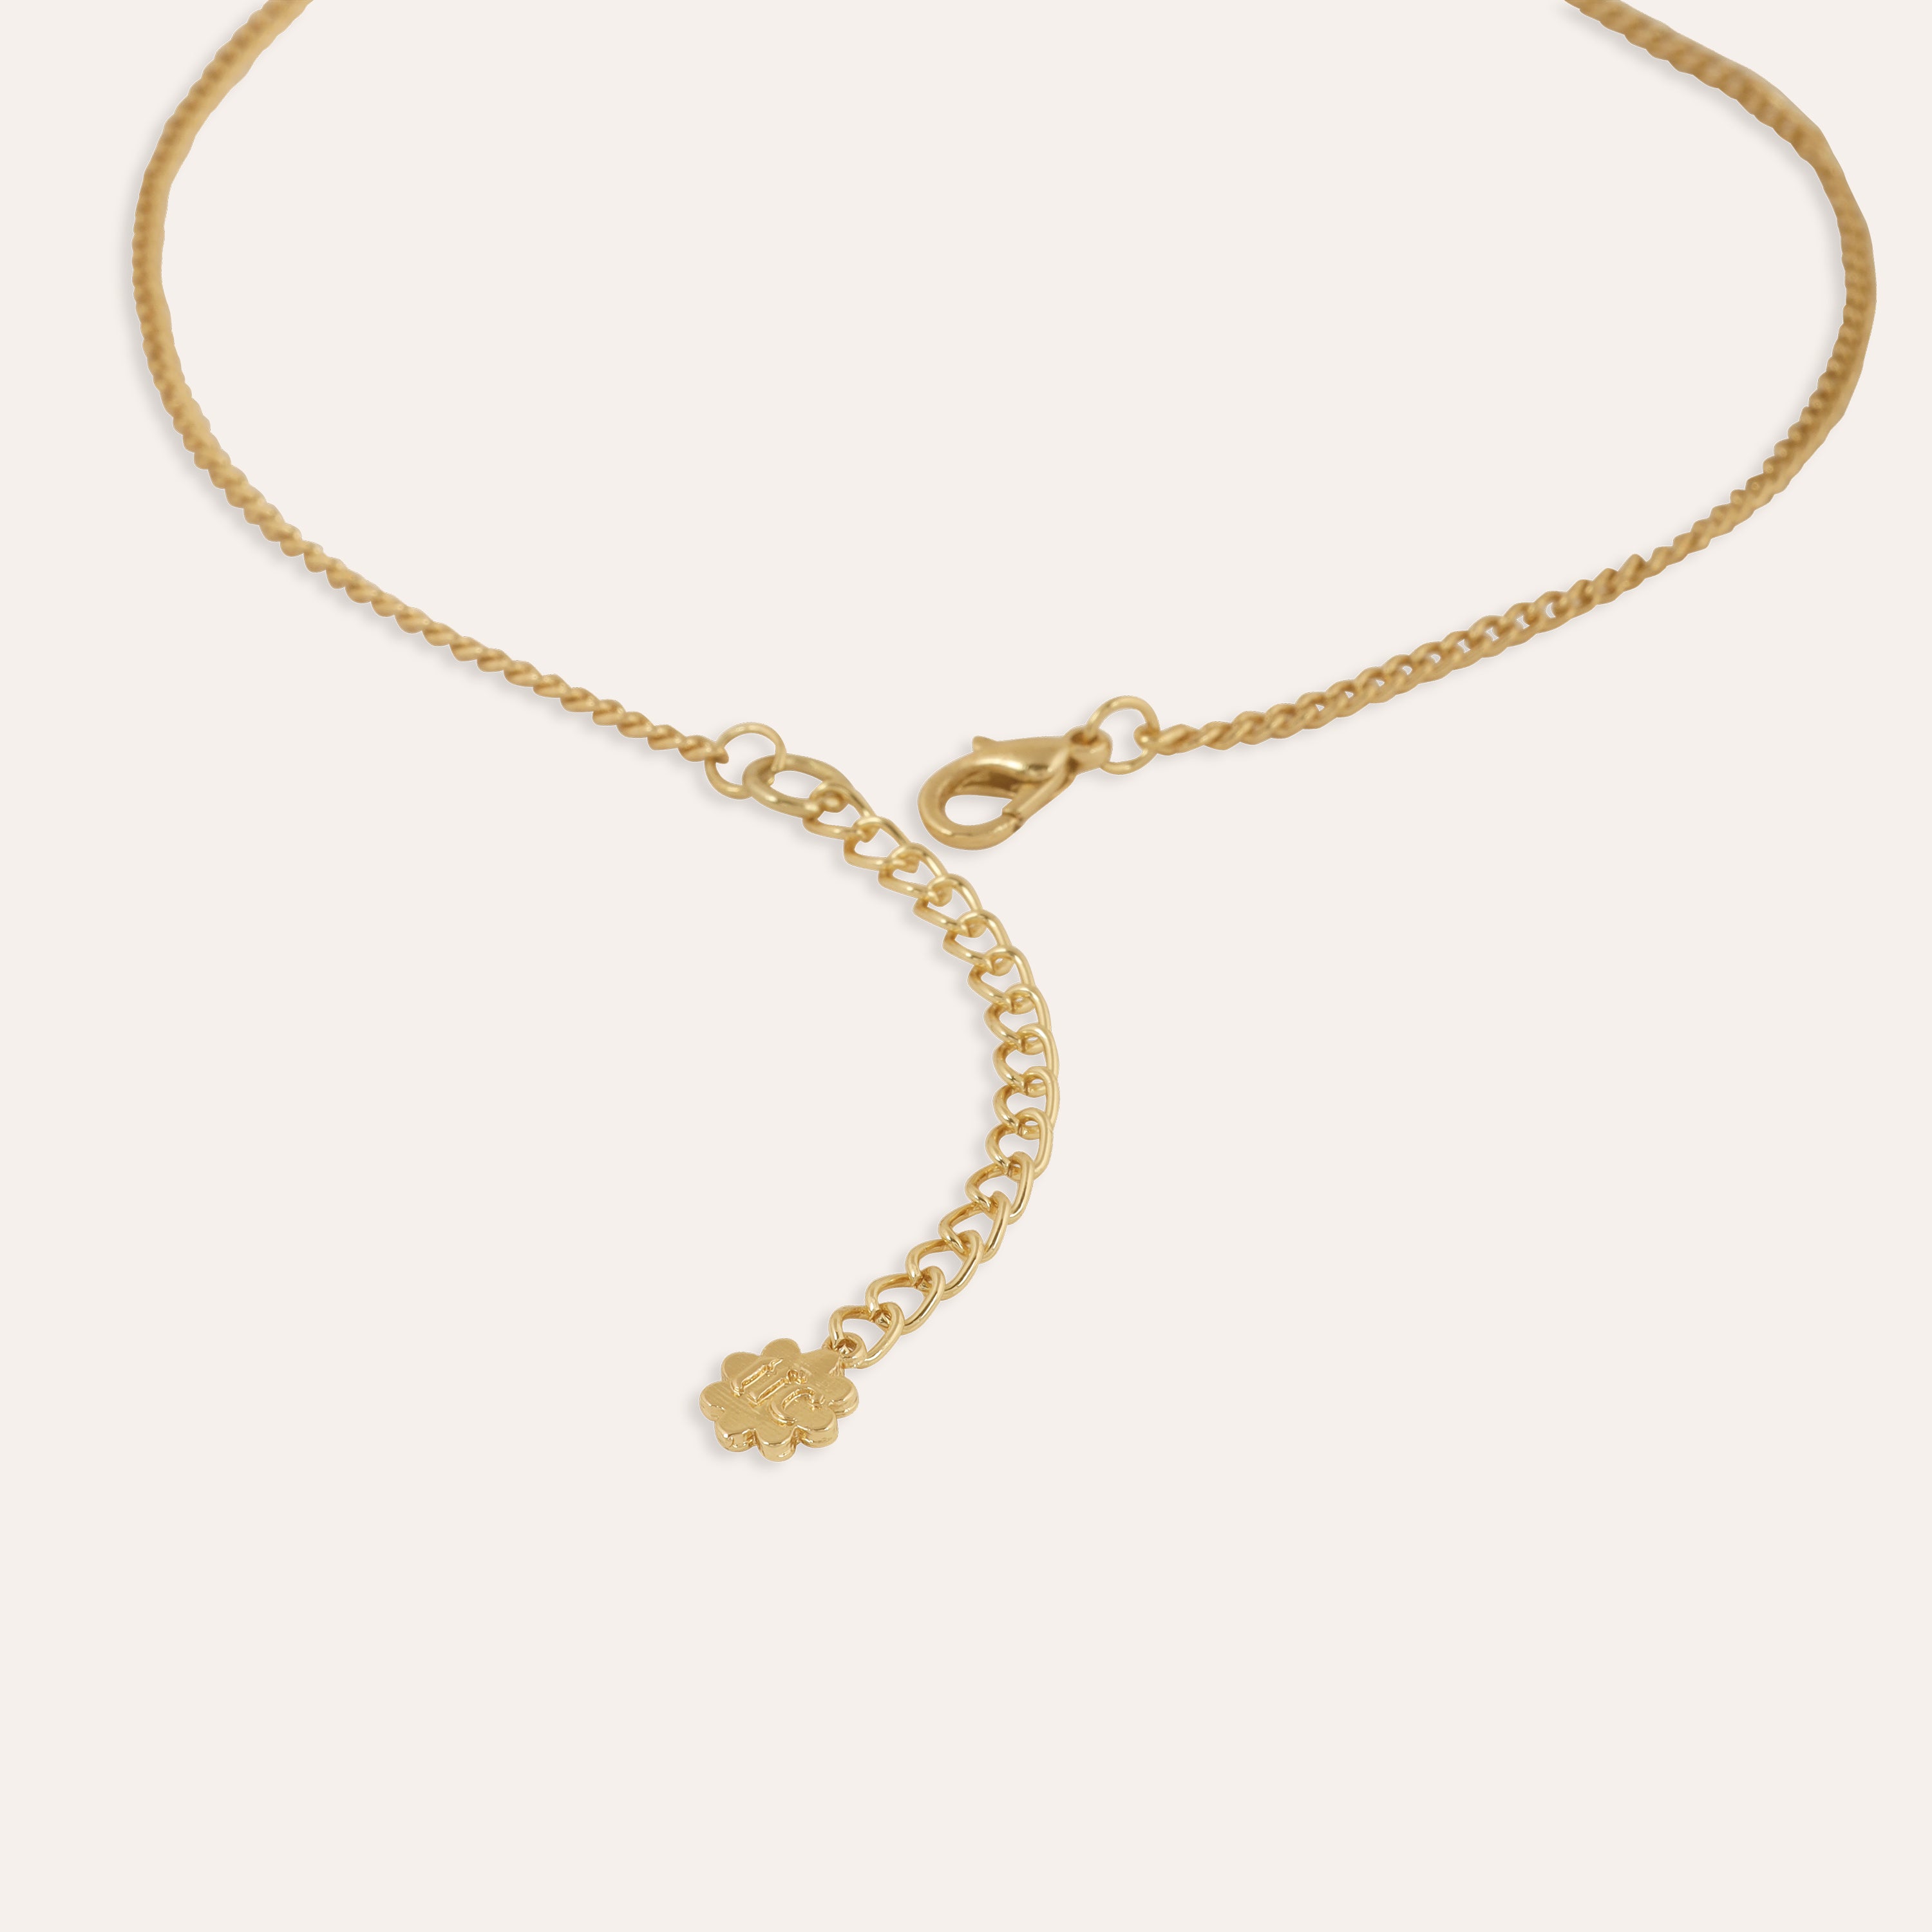 TFC Talisman Gold Plated Pendant Necklace-Enhance your elegance with our collection of gold-plated necklaces for women. Choose from stunning pendant necklaces, chic choker necklaces, and trendy layered necklaces. Our sleek and dainty designs are both affordable and anti-tarnish, ensuring lasting beauty. Enjoy the cheapest fashion jewellery, lightweight and stylish- only at The Fun Company